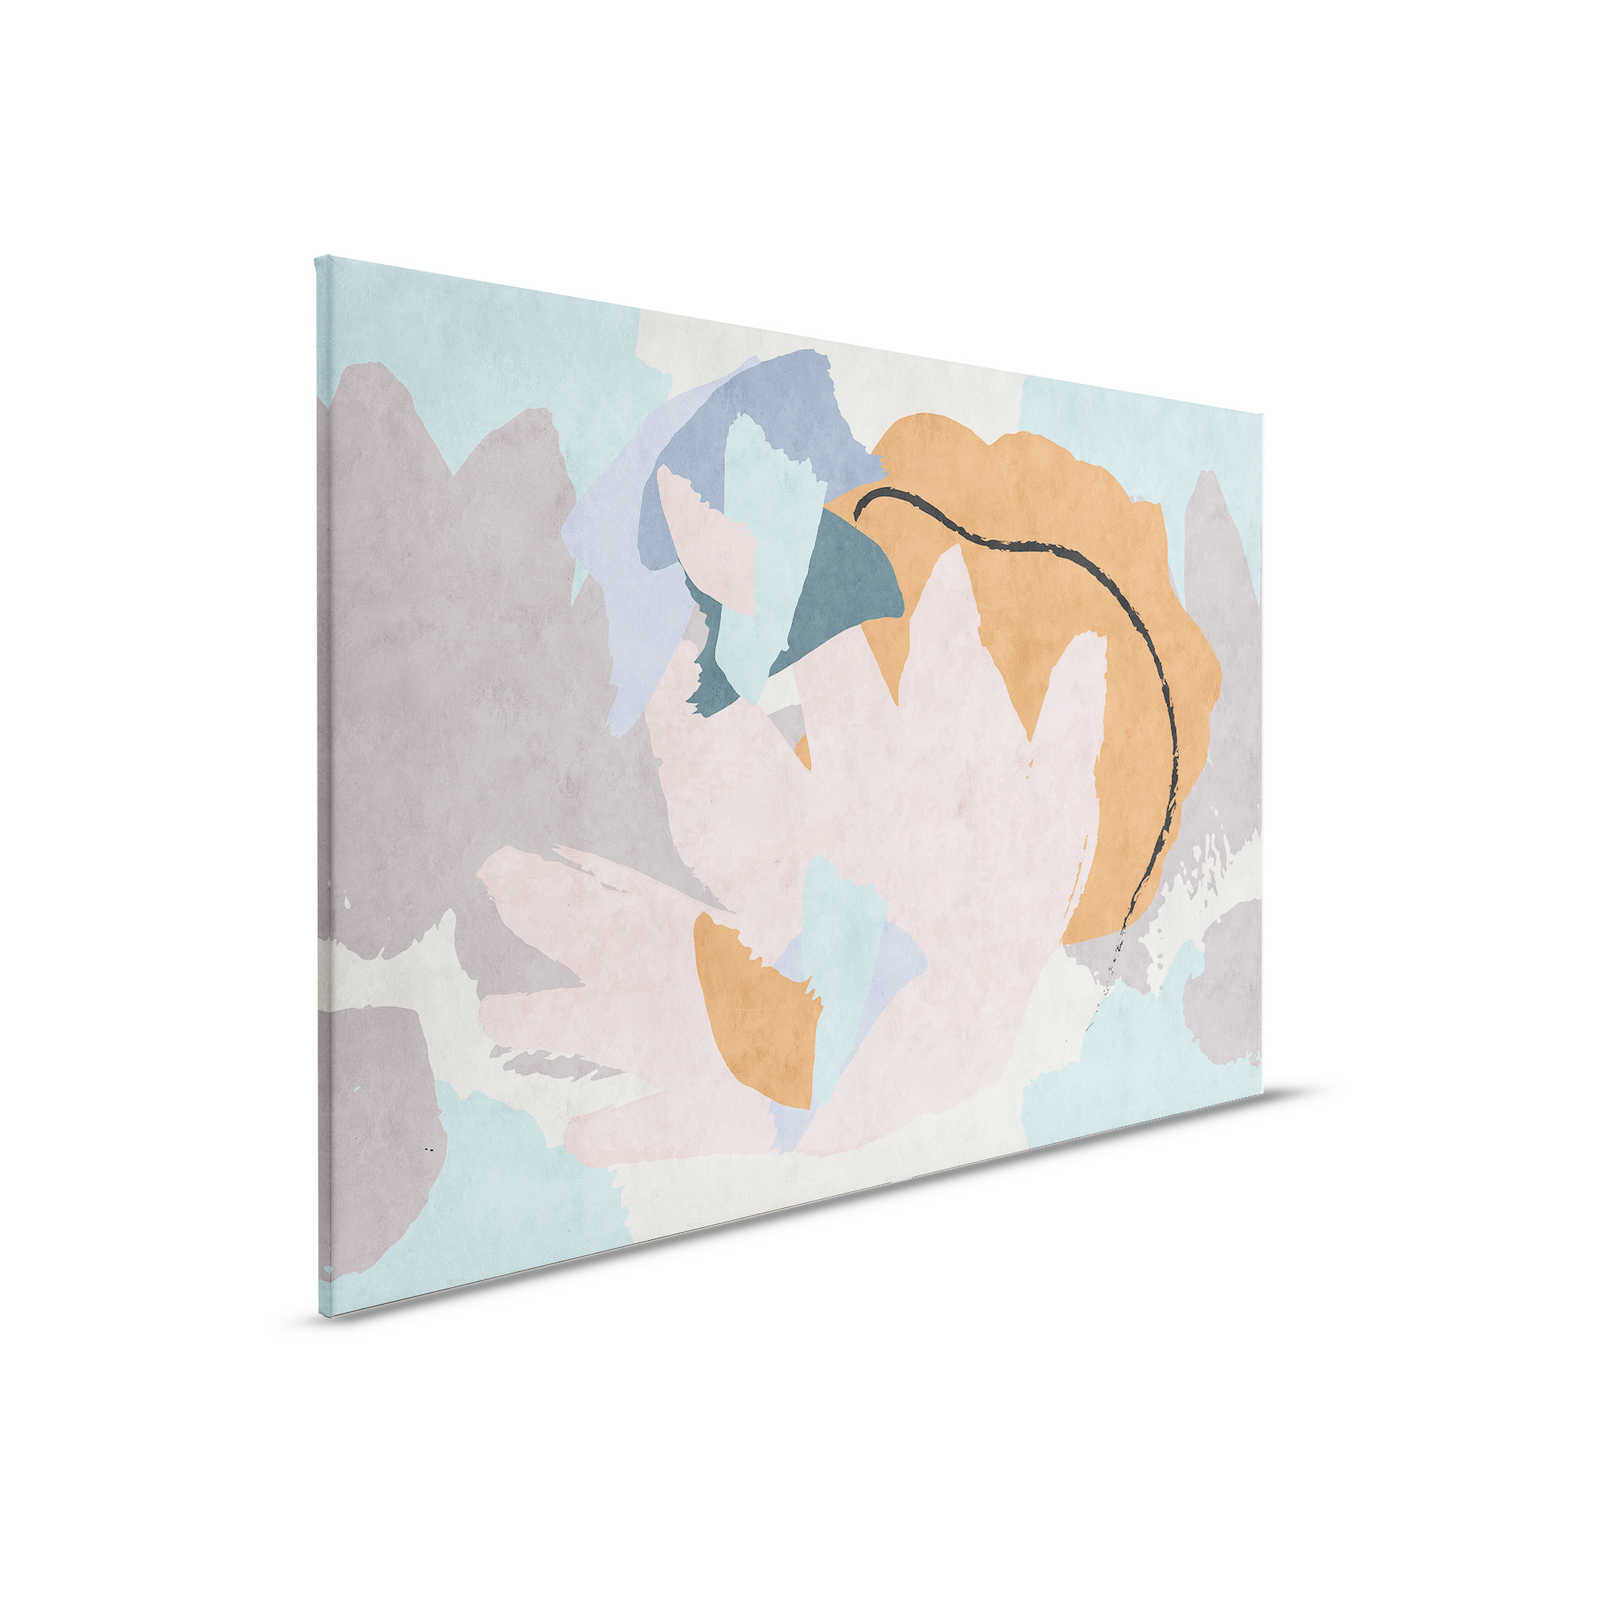         Floral Collage 2 - modern canvas painting abstract art in blotting paper structure - 0,90 m x 0,60 m
    